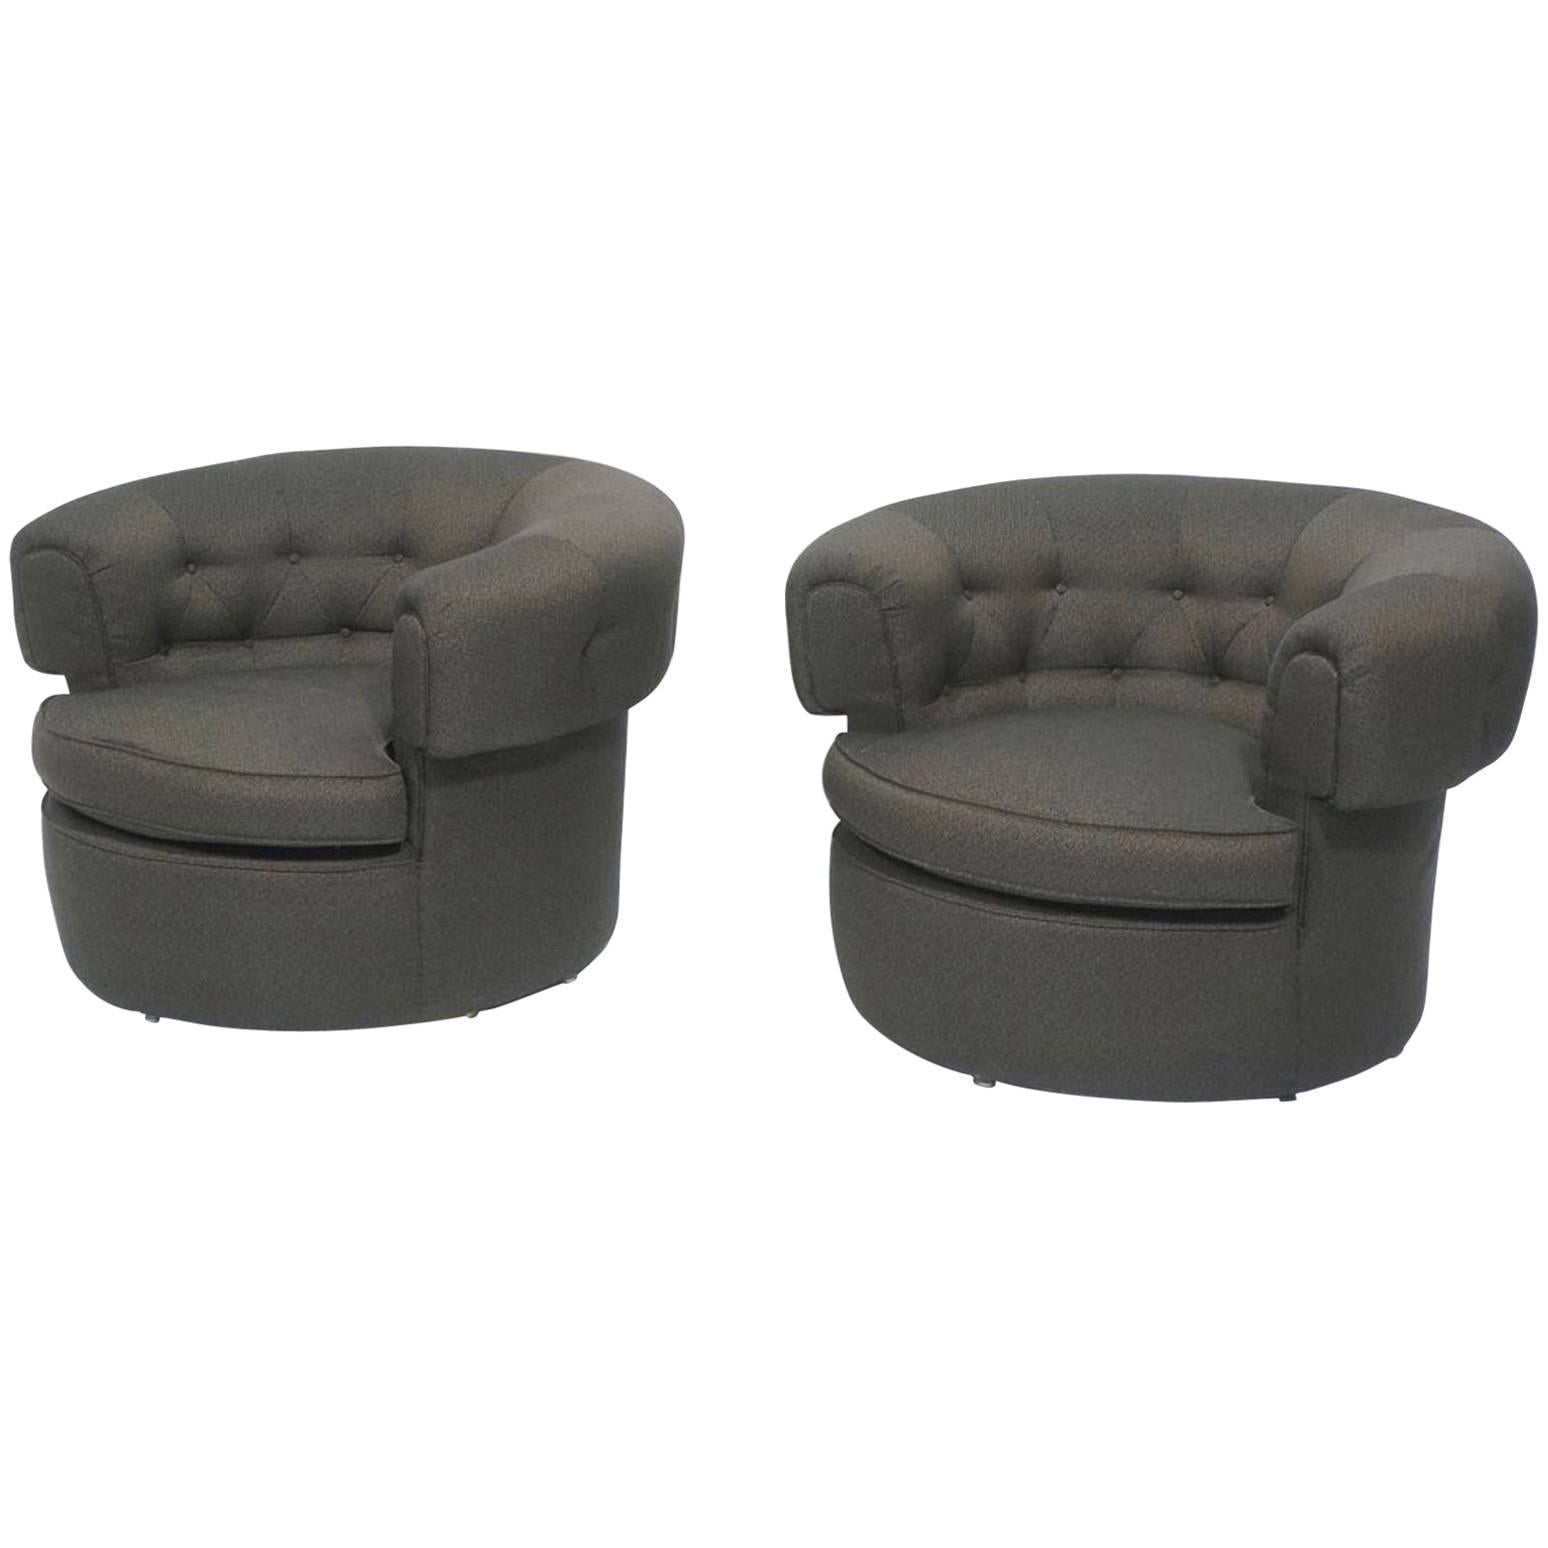 Pair of Rolling Swivel Chairs by Modern Age